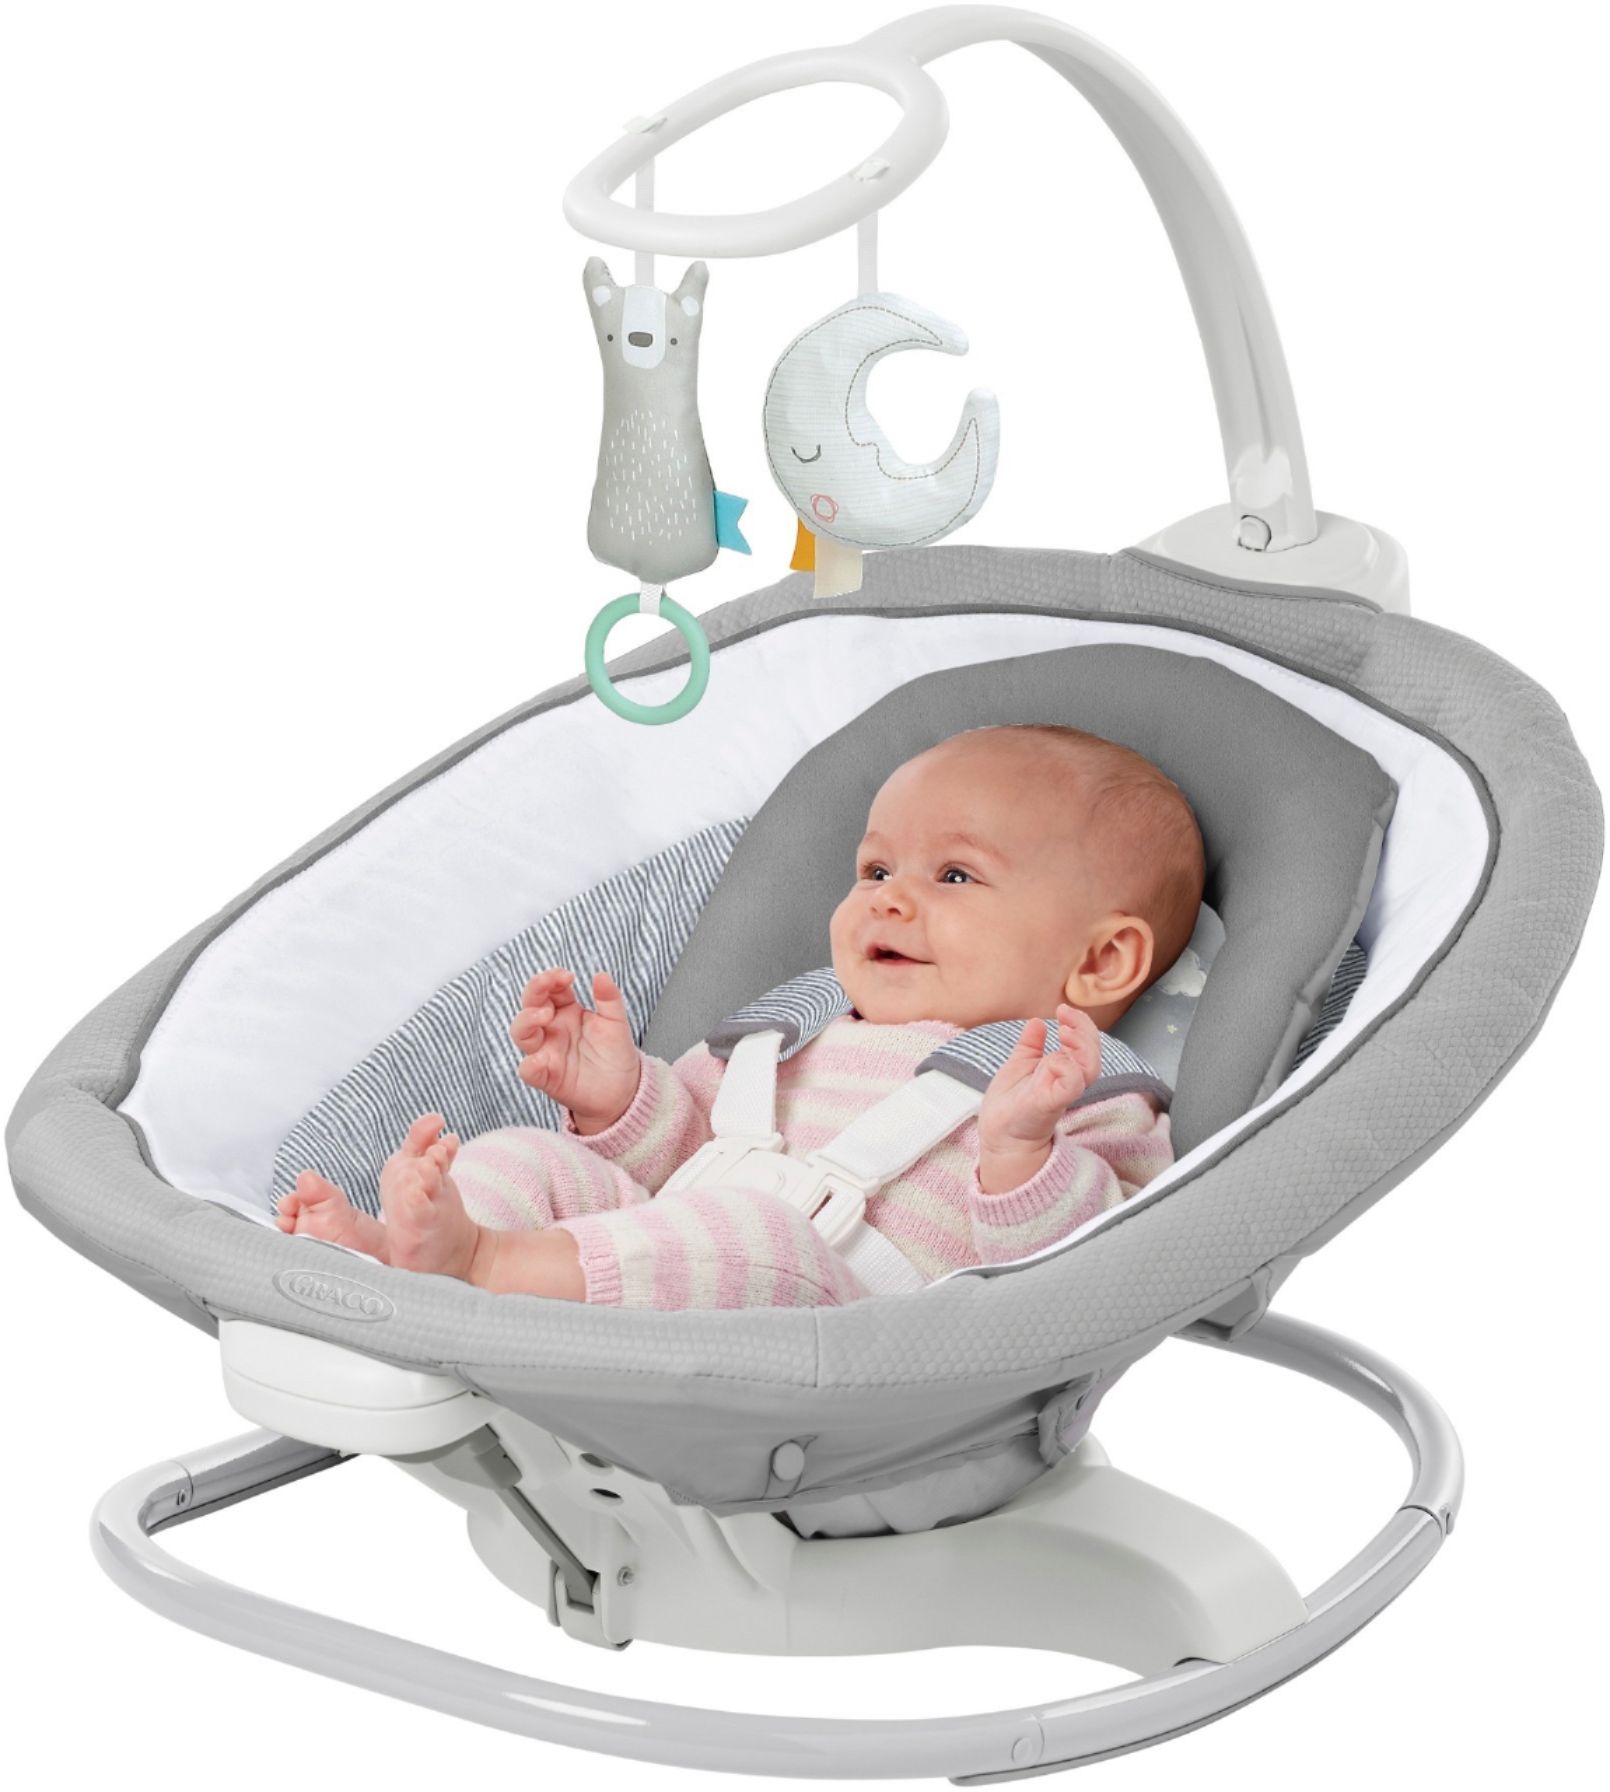 Sailor Graco Sense2Soothe Swing with Cry Detection Technology 